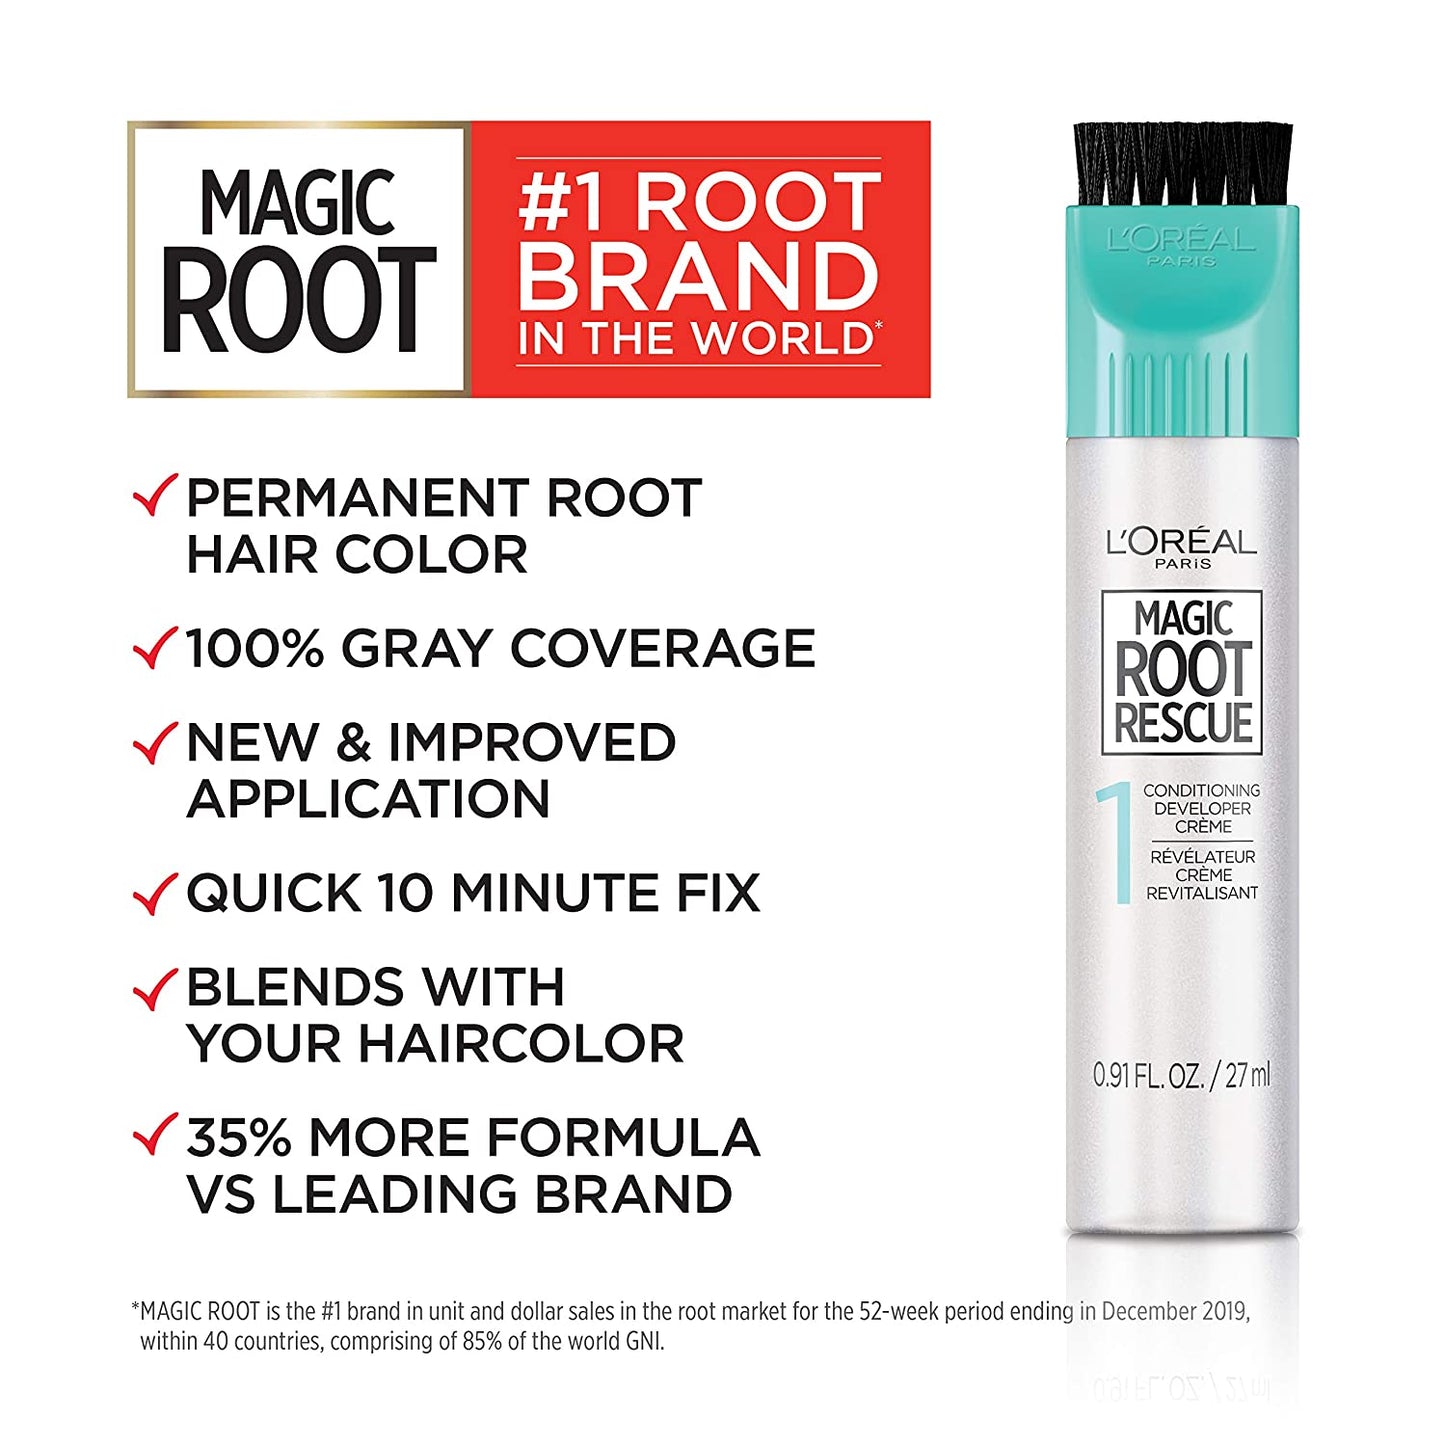 L'Oreal Paris Magic Root Rescue 10 Minute Root Permanent Hair Coloring Kit with Quick Precision Applicator, 100% Gray Coverage